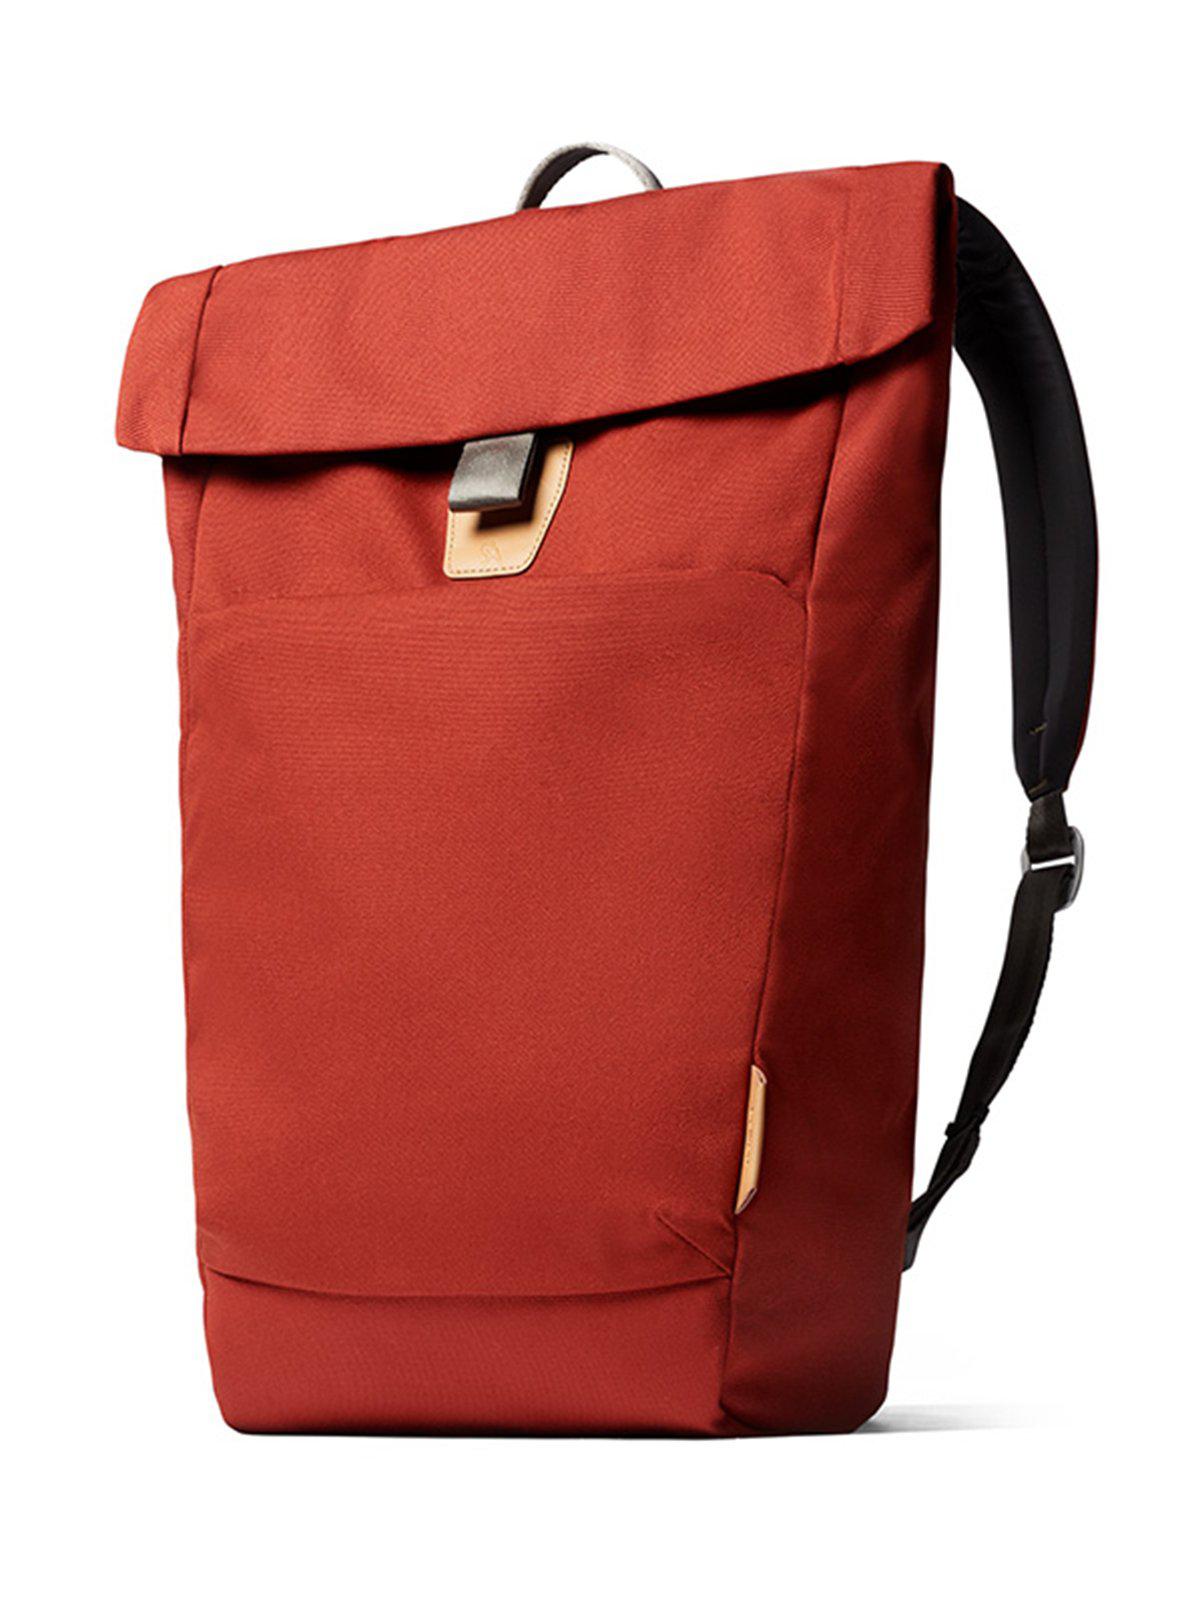 Bellroy Studio Backpack Red Ochre - MORE by Morello Indonesia